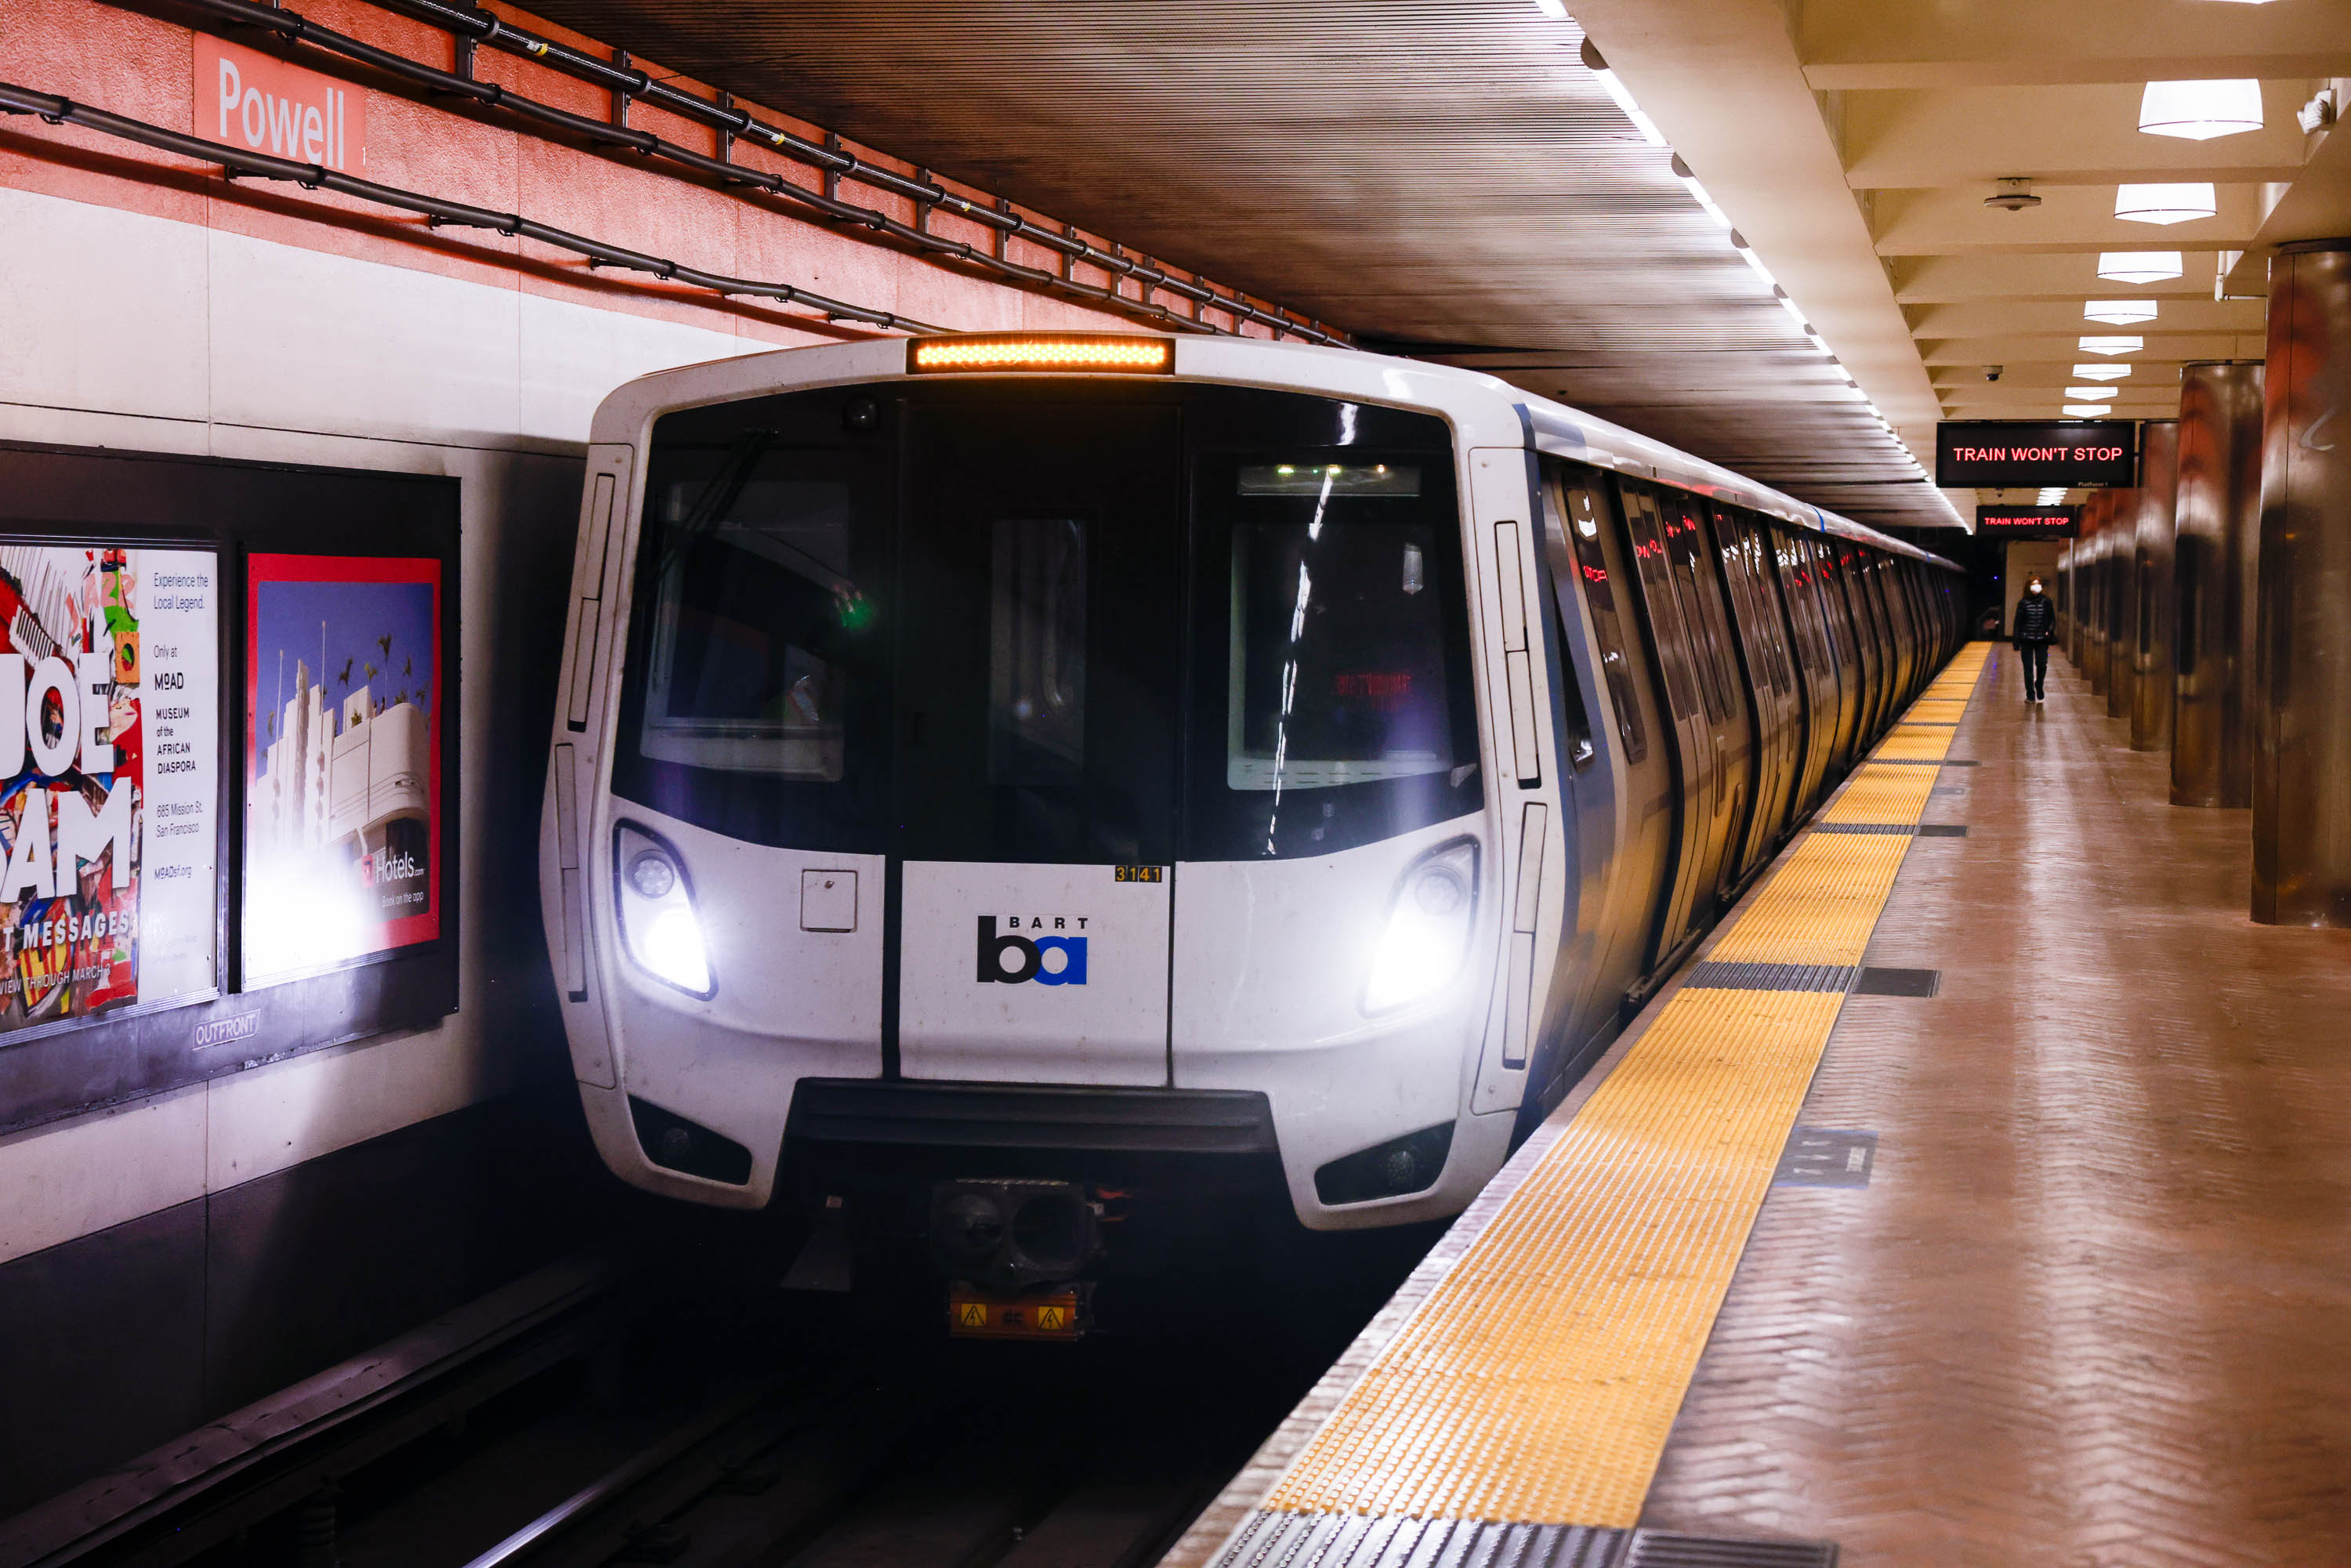 A BART train is at the Powell Street station, with its white front and headlights on. The platform has yellow tactile paving and posters on the walls.